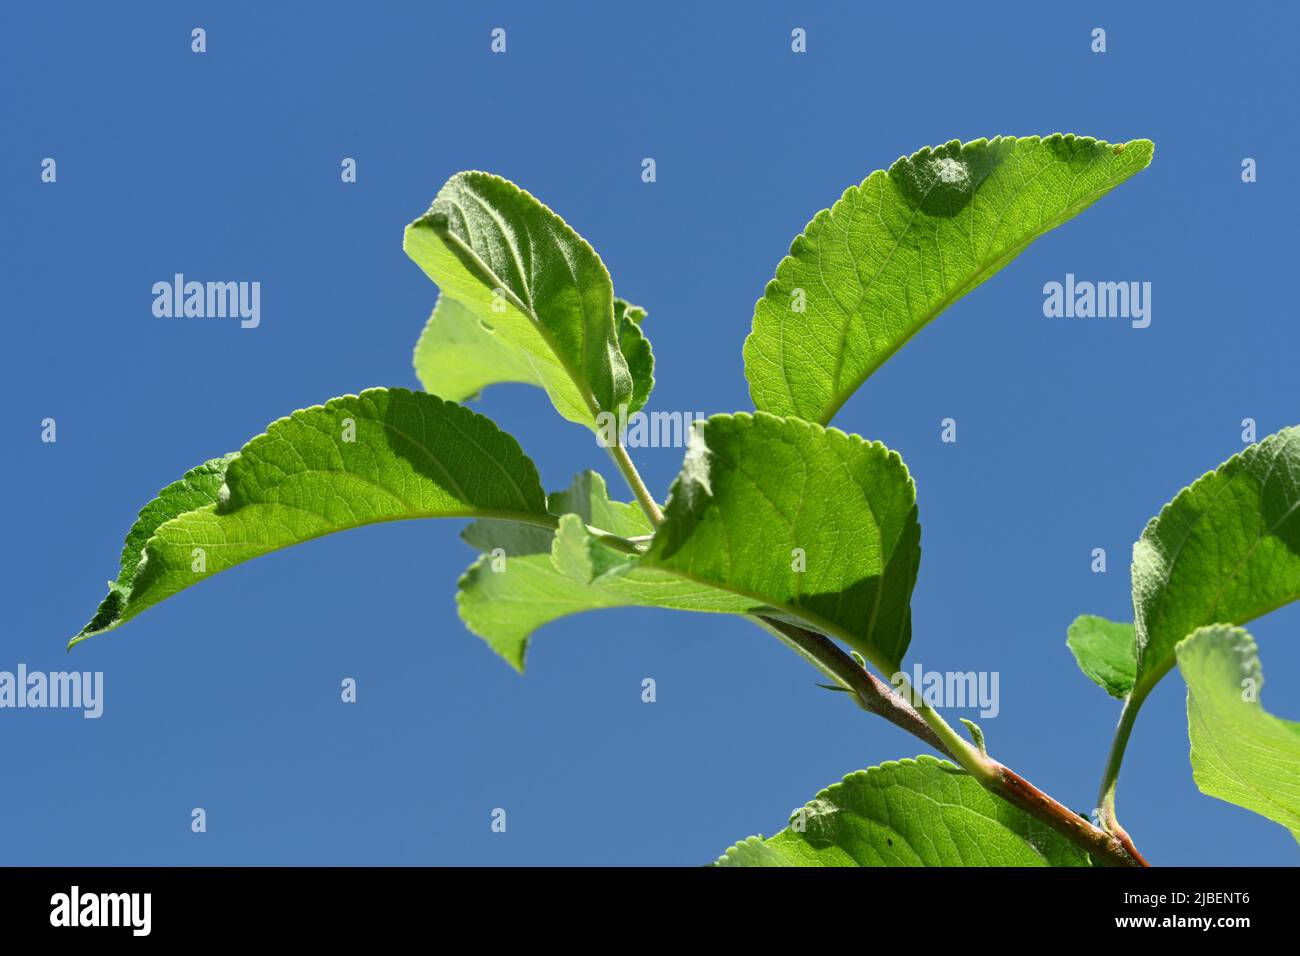 Leaves from a Golden Delicious Apple Tree on a blue-sky background. Stock Photo